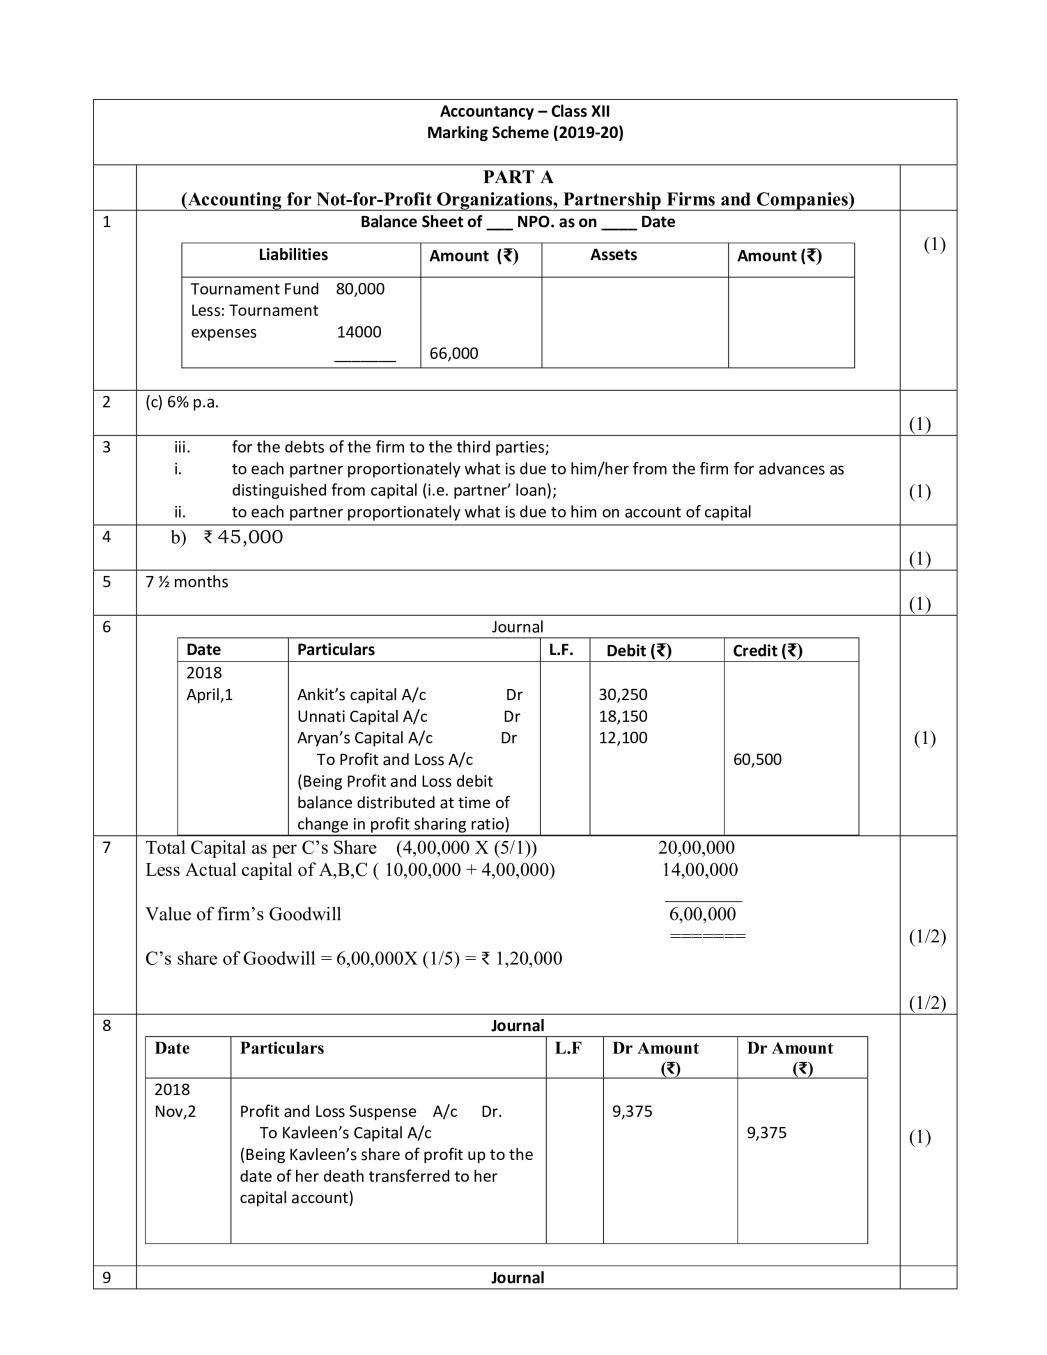 CBSE Class 12 Marking Scheme 2020 for Accountancy - Page 1